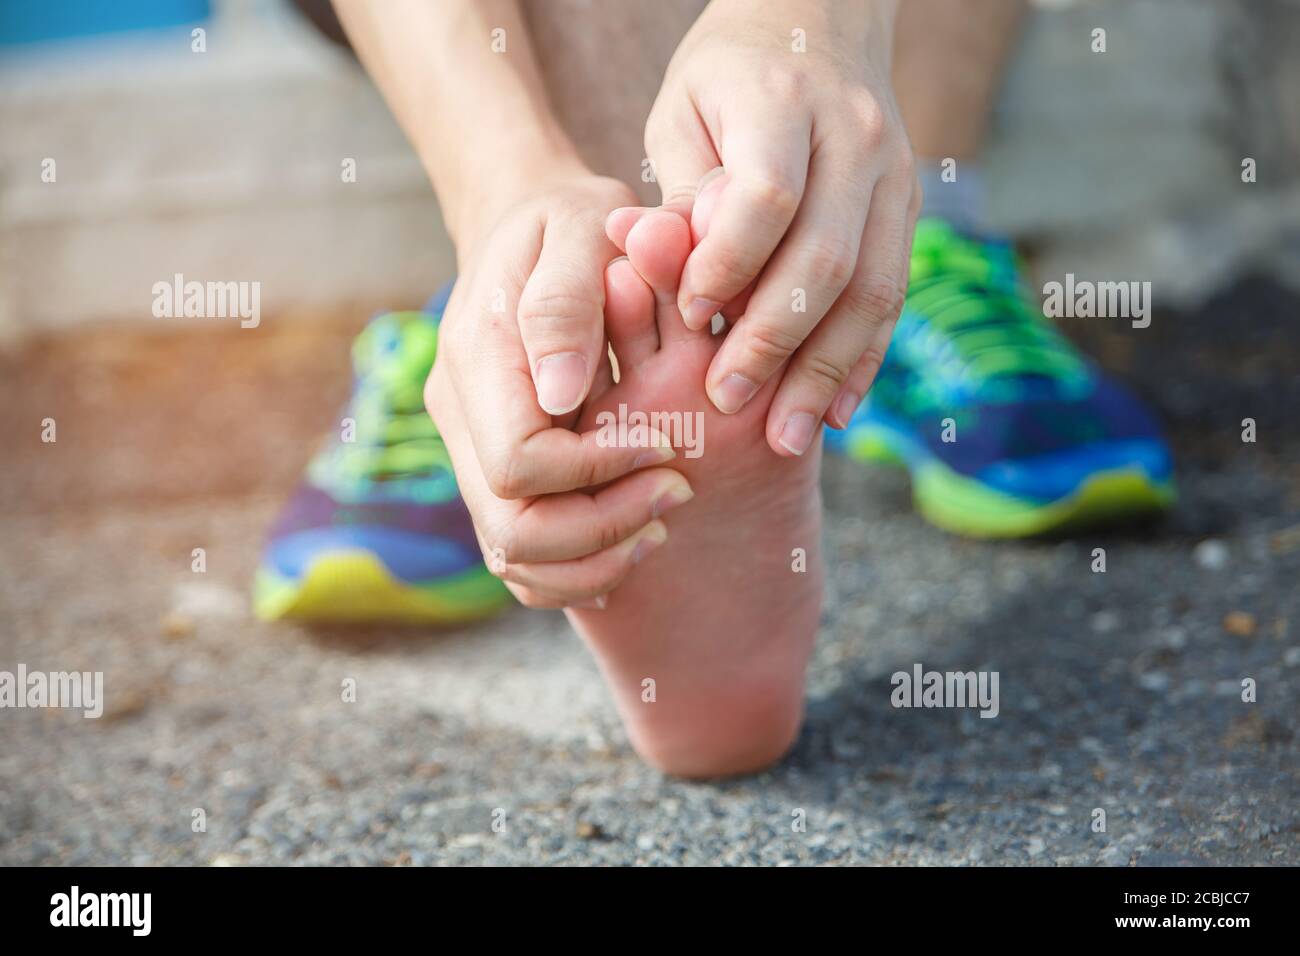 Man runner athlete foot injury and pain. Man suffering from painful foot while running on the road. Stock Photo